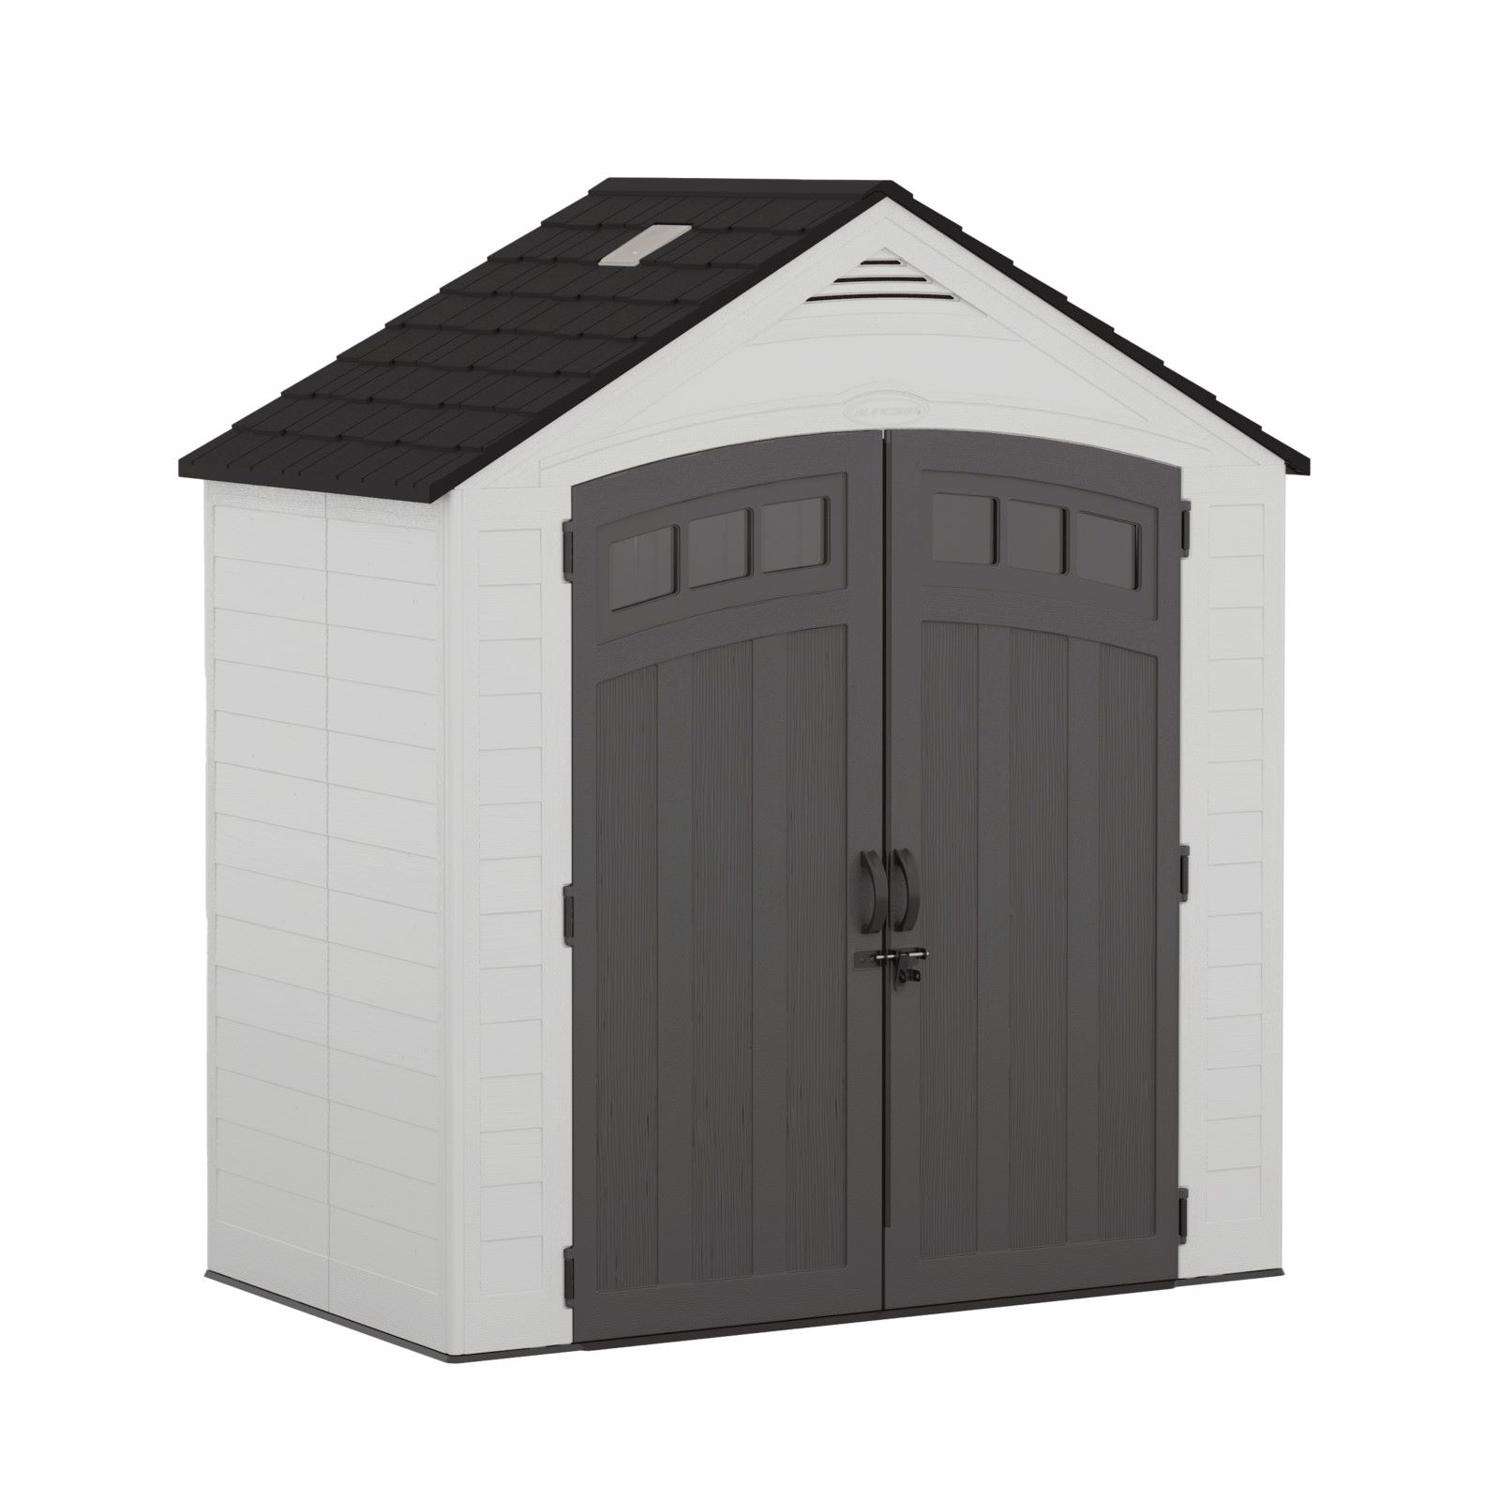 Shed Sizes: How to choose the right shed size?